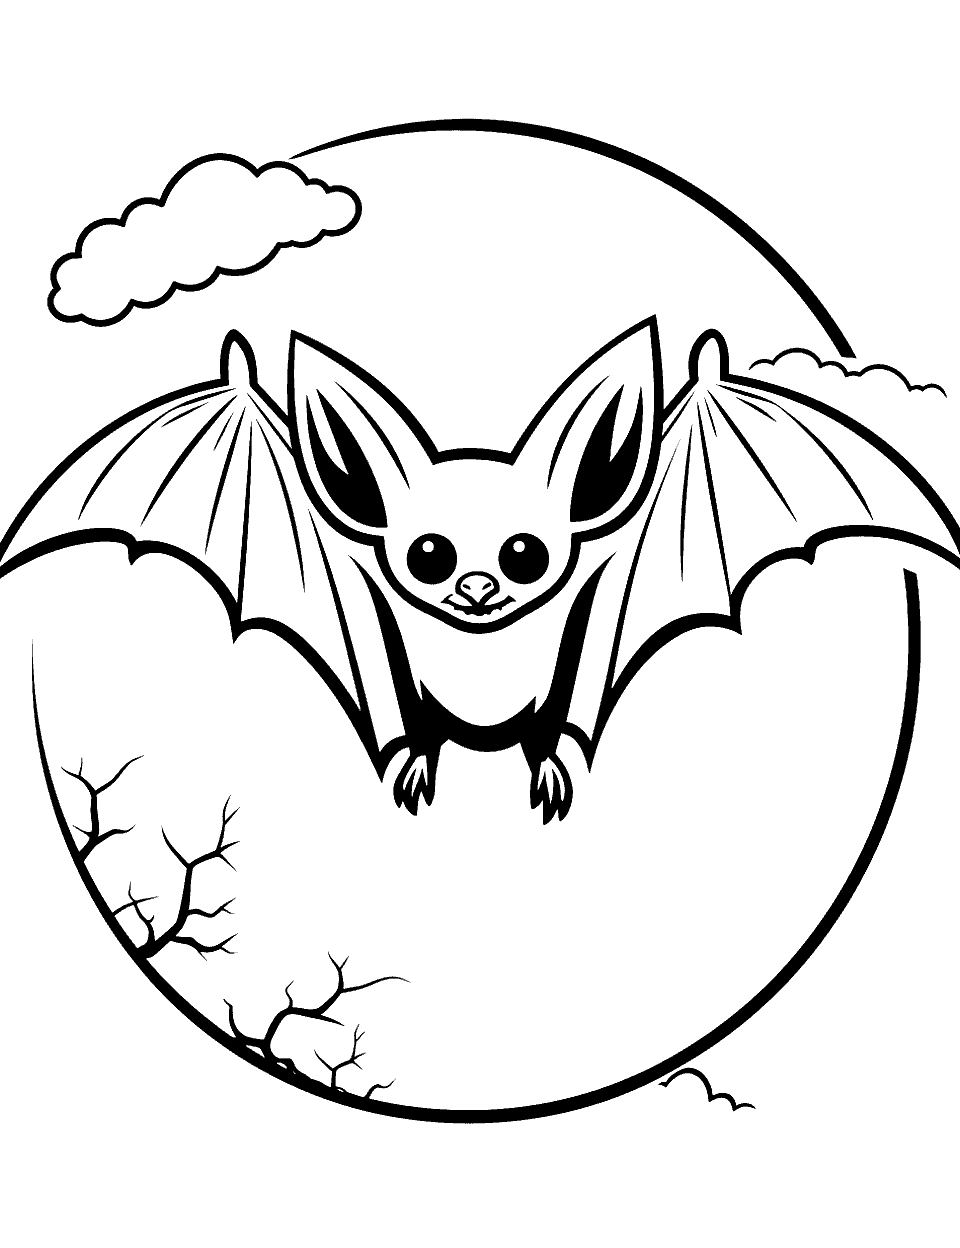 Spooky Bat Silhouette Coloring Page - A silhouette of a bat against a moon, creating a spooky atmosphere.